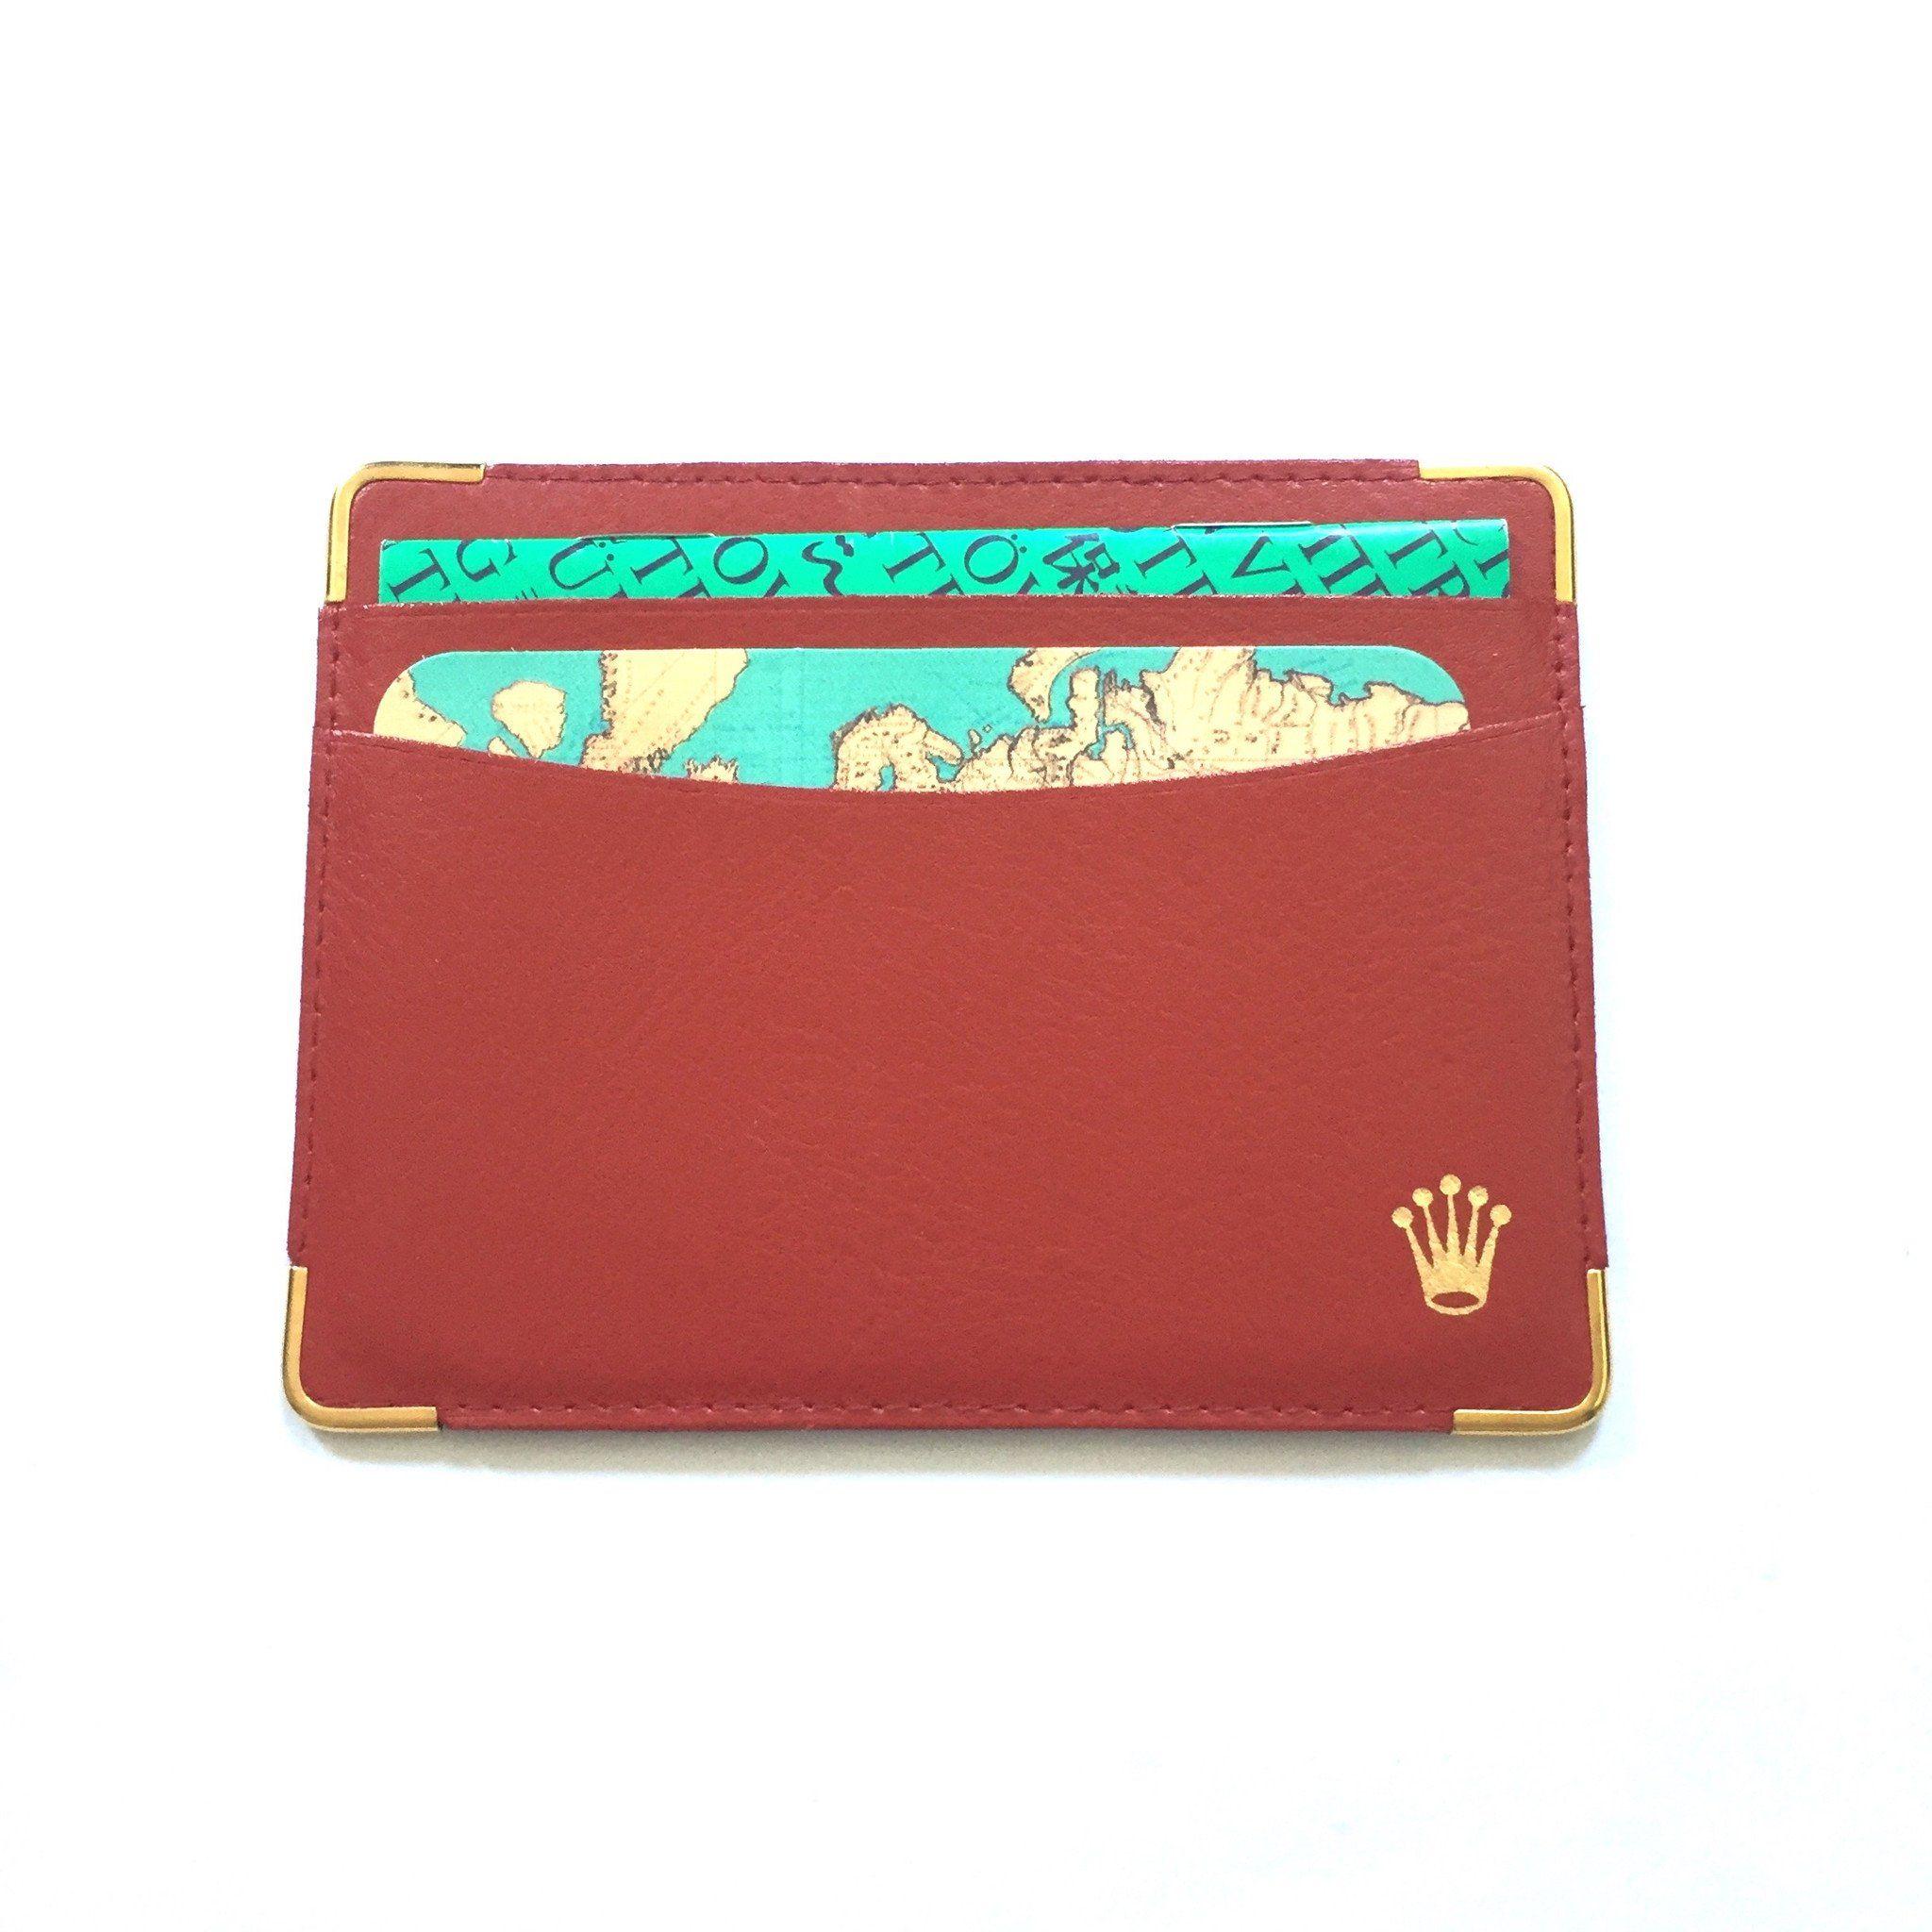 Red and Gold Crown Logo - Rolex - New Old Stock Dark Red Leather Card Case with Gold Crown ...